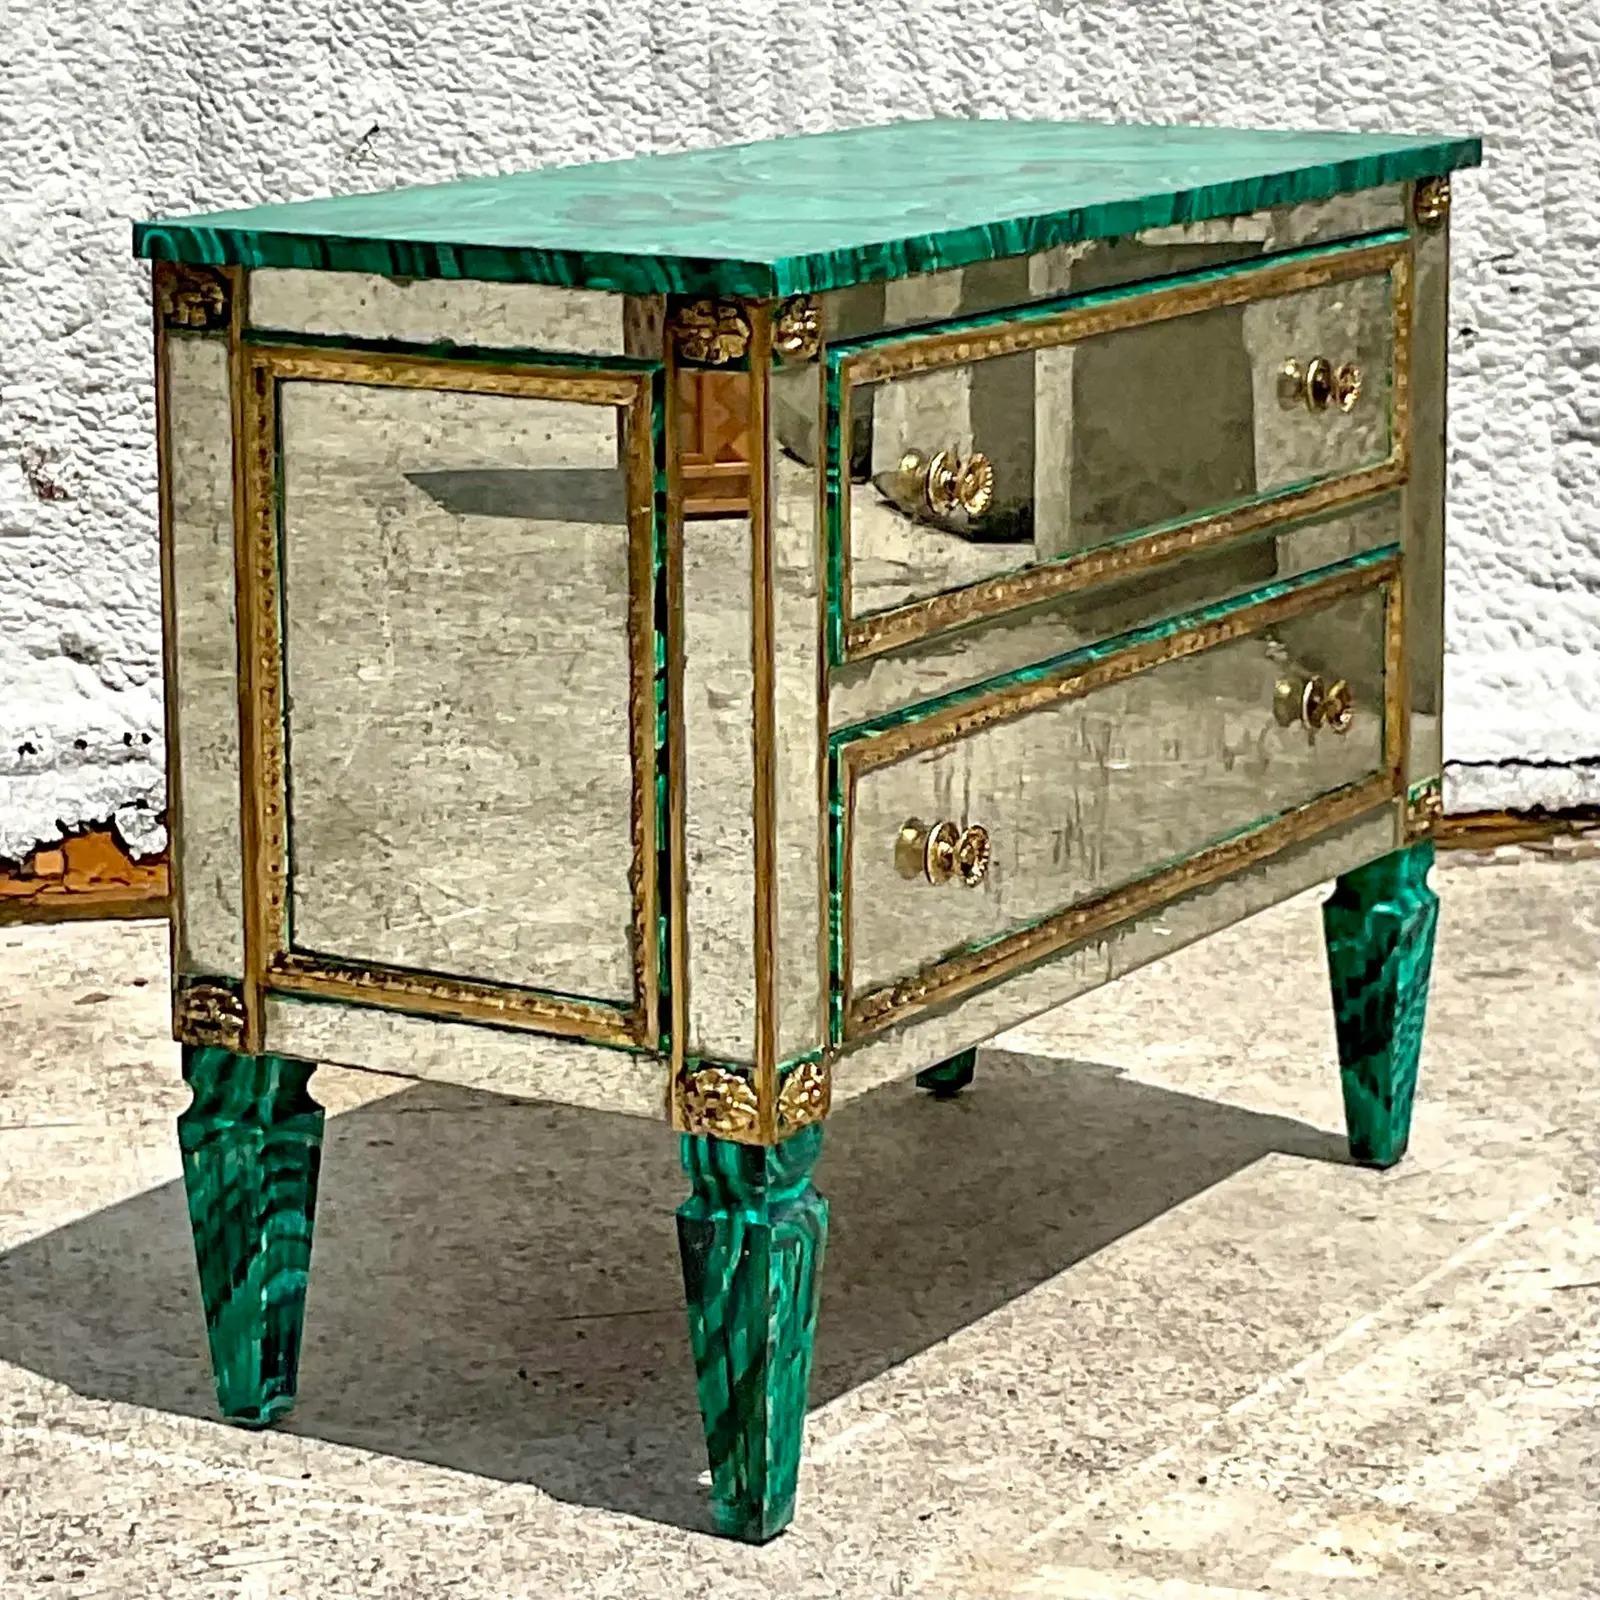 An extraordinary vintage Regency chest of drawers. A truly magnificent piece of furniture with a hand done Malachite finish with inset vintage mirrored panels and gilt trim. This is the kind of piece that you design a whole room around. Acquired